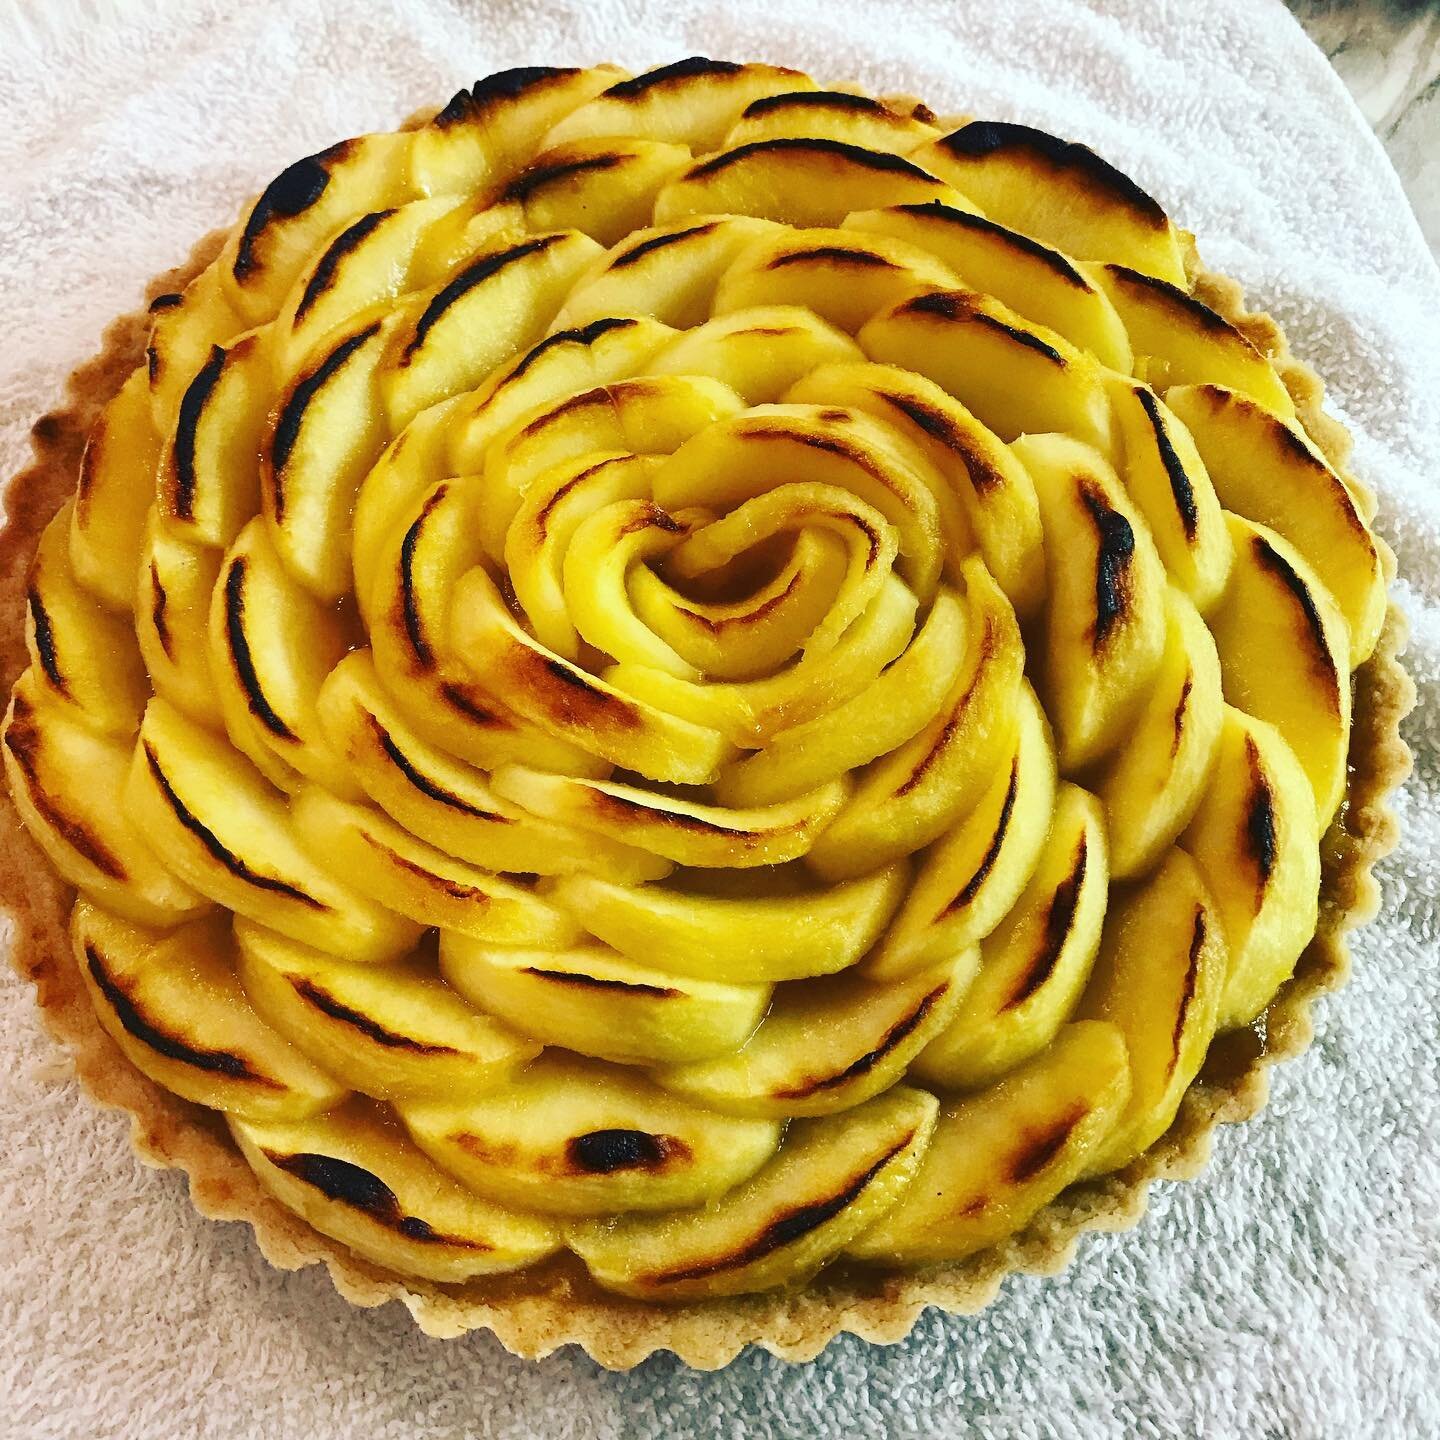 French Apple Tart...10 apples in this little guy!! Served with honey and green tea sorbet. #yegcatering #yegfood #apples #fall #to @cooksillustrated @testkitchen